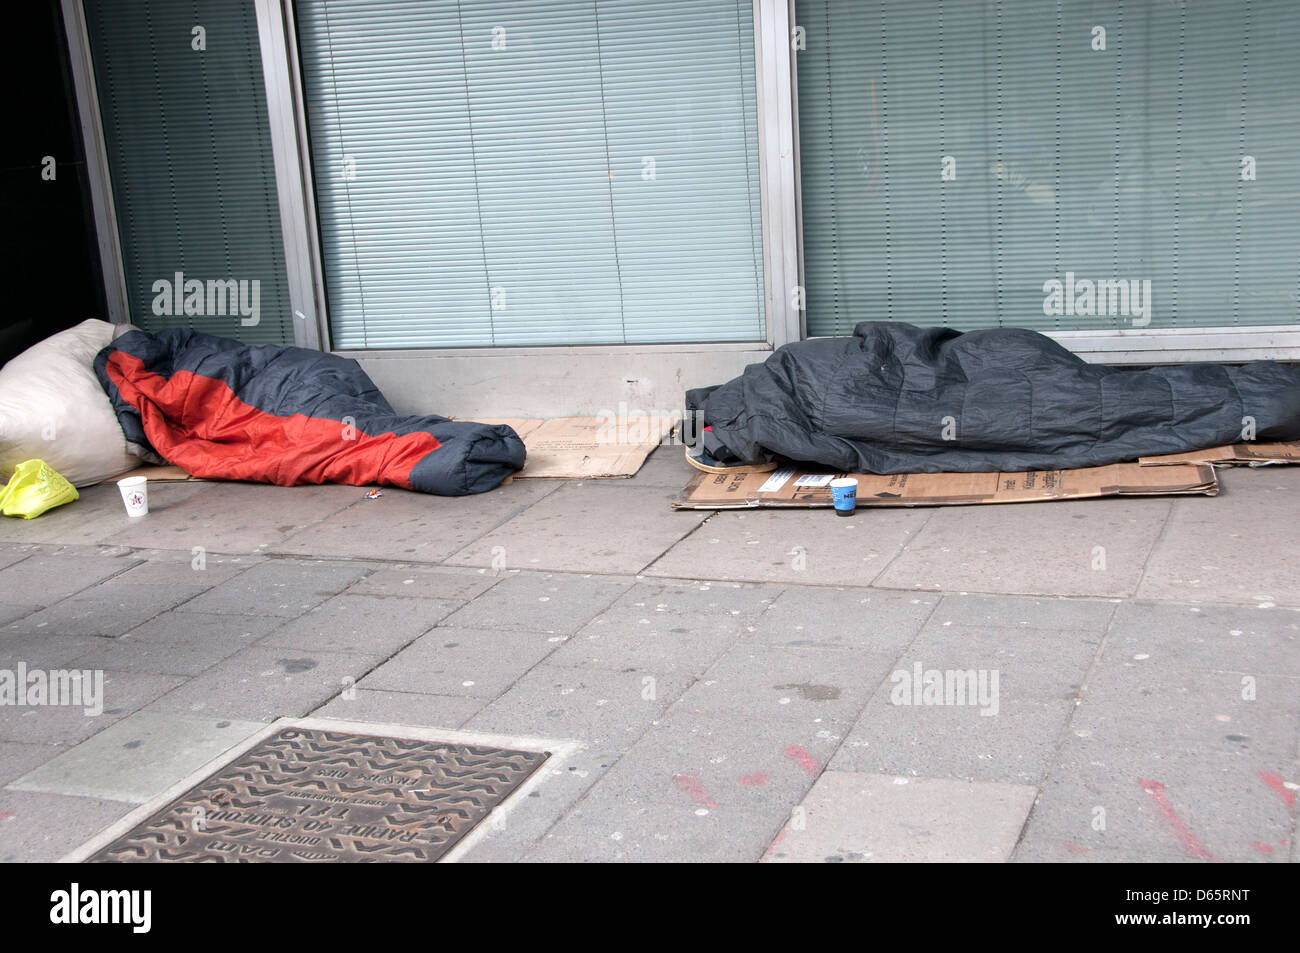 Sleeping rough in Central London Stock Photo